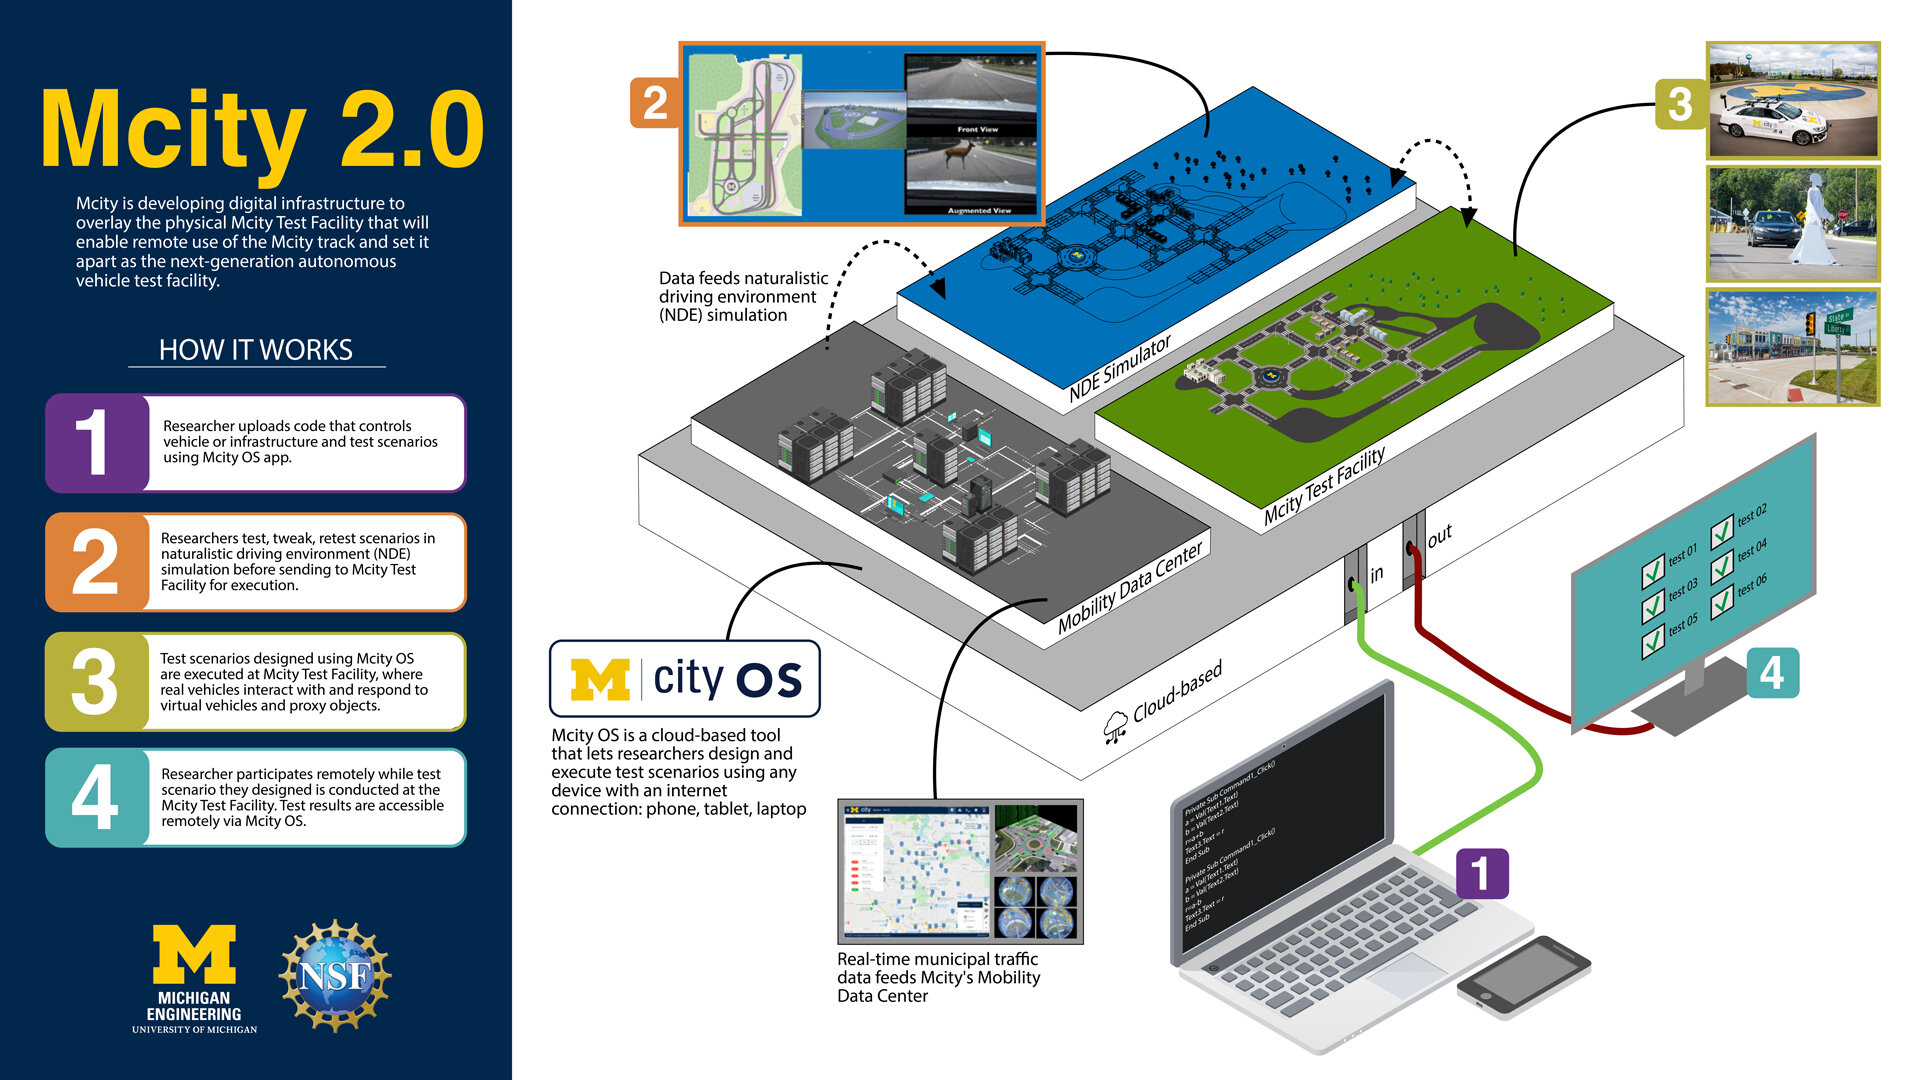 An overview of the M city facilty, showing both physical and virtual spaces for researchers. 1). a laptop is connected to the M city OS. 2). Data feeds into naturalistic driving environment simulation 3). Real vehicles within Mcity react and respond to virtual vehicles and proxy objects to test researchers code. 4). Researcher participates remotely and accesses results and data remotely via M city OS.